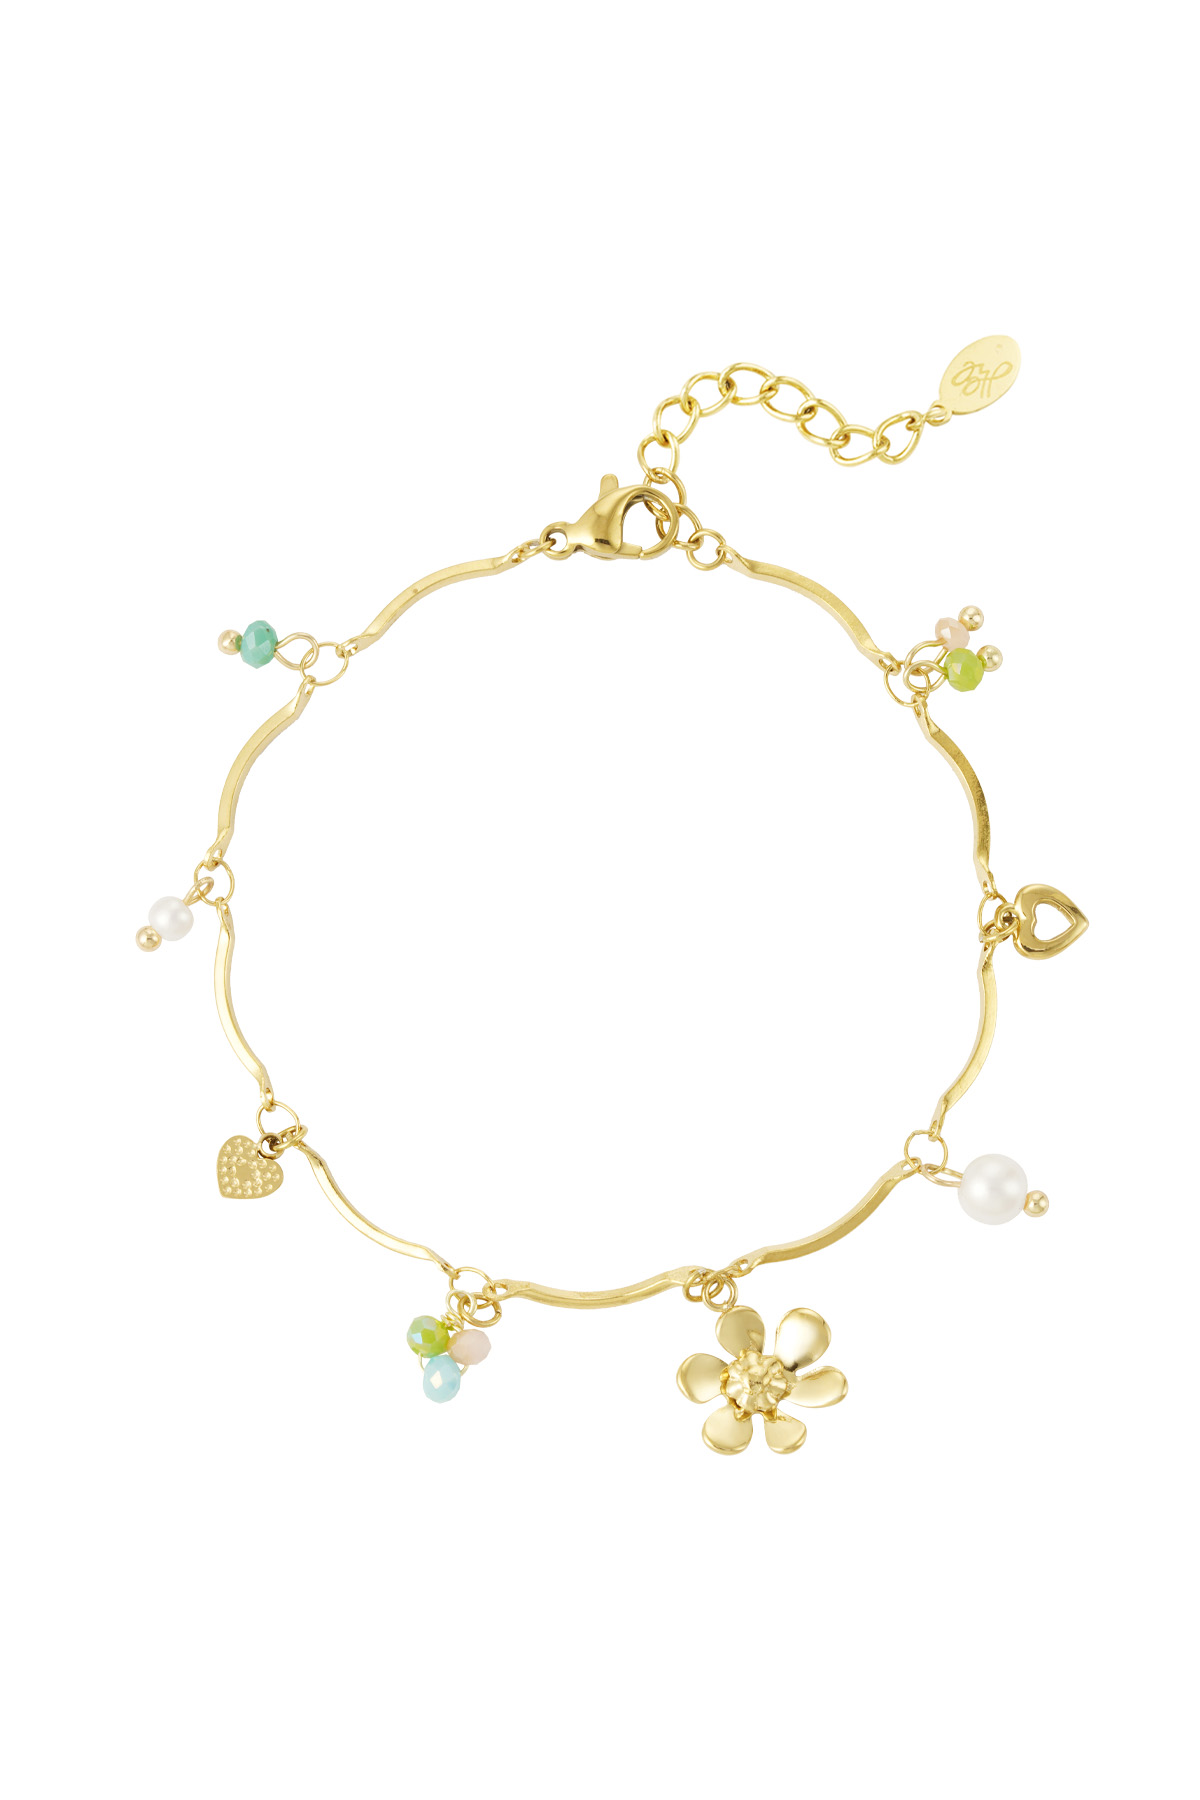 Armband Sommerblume - gold h5 